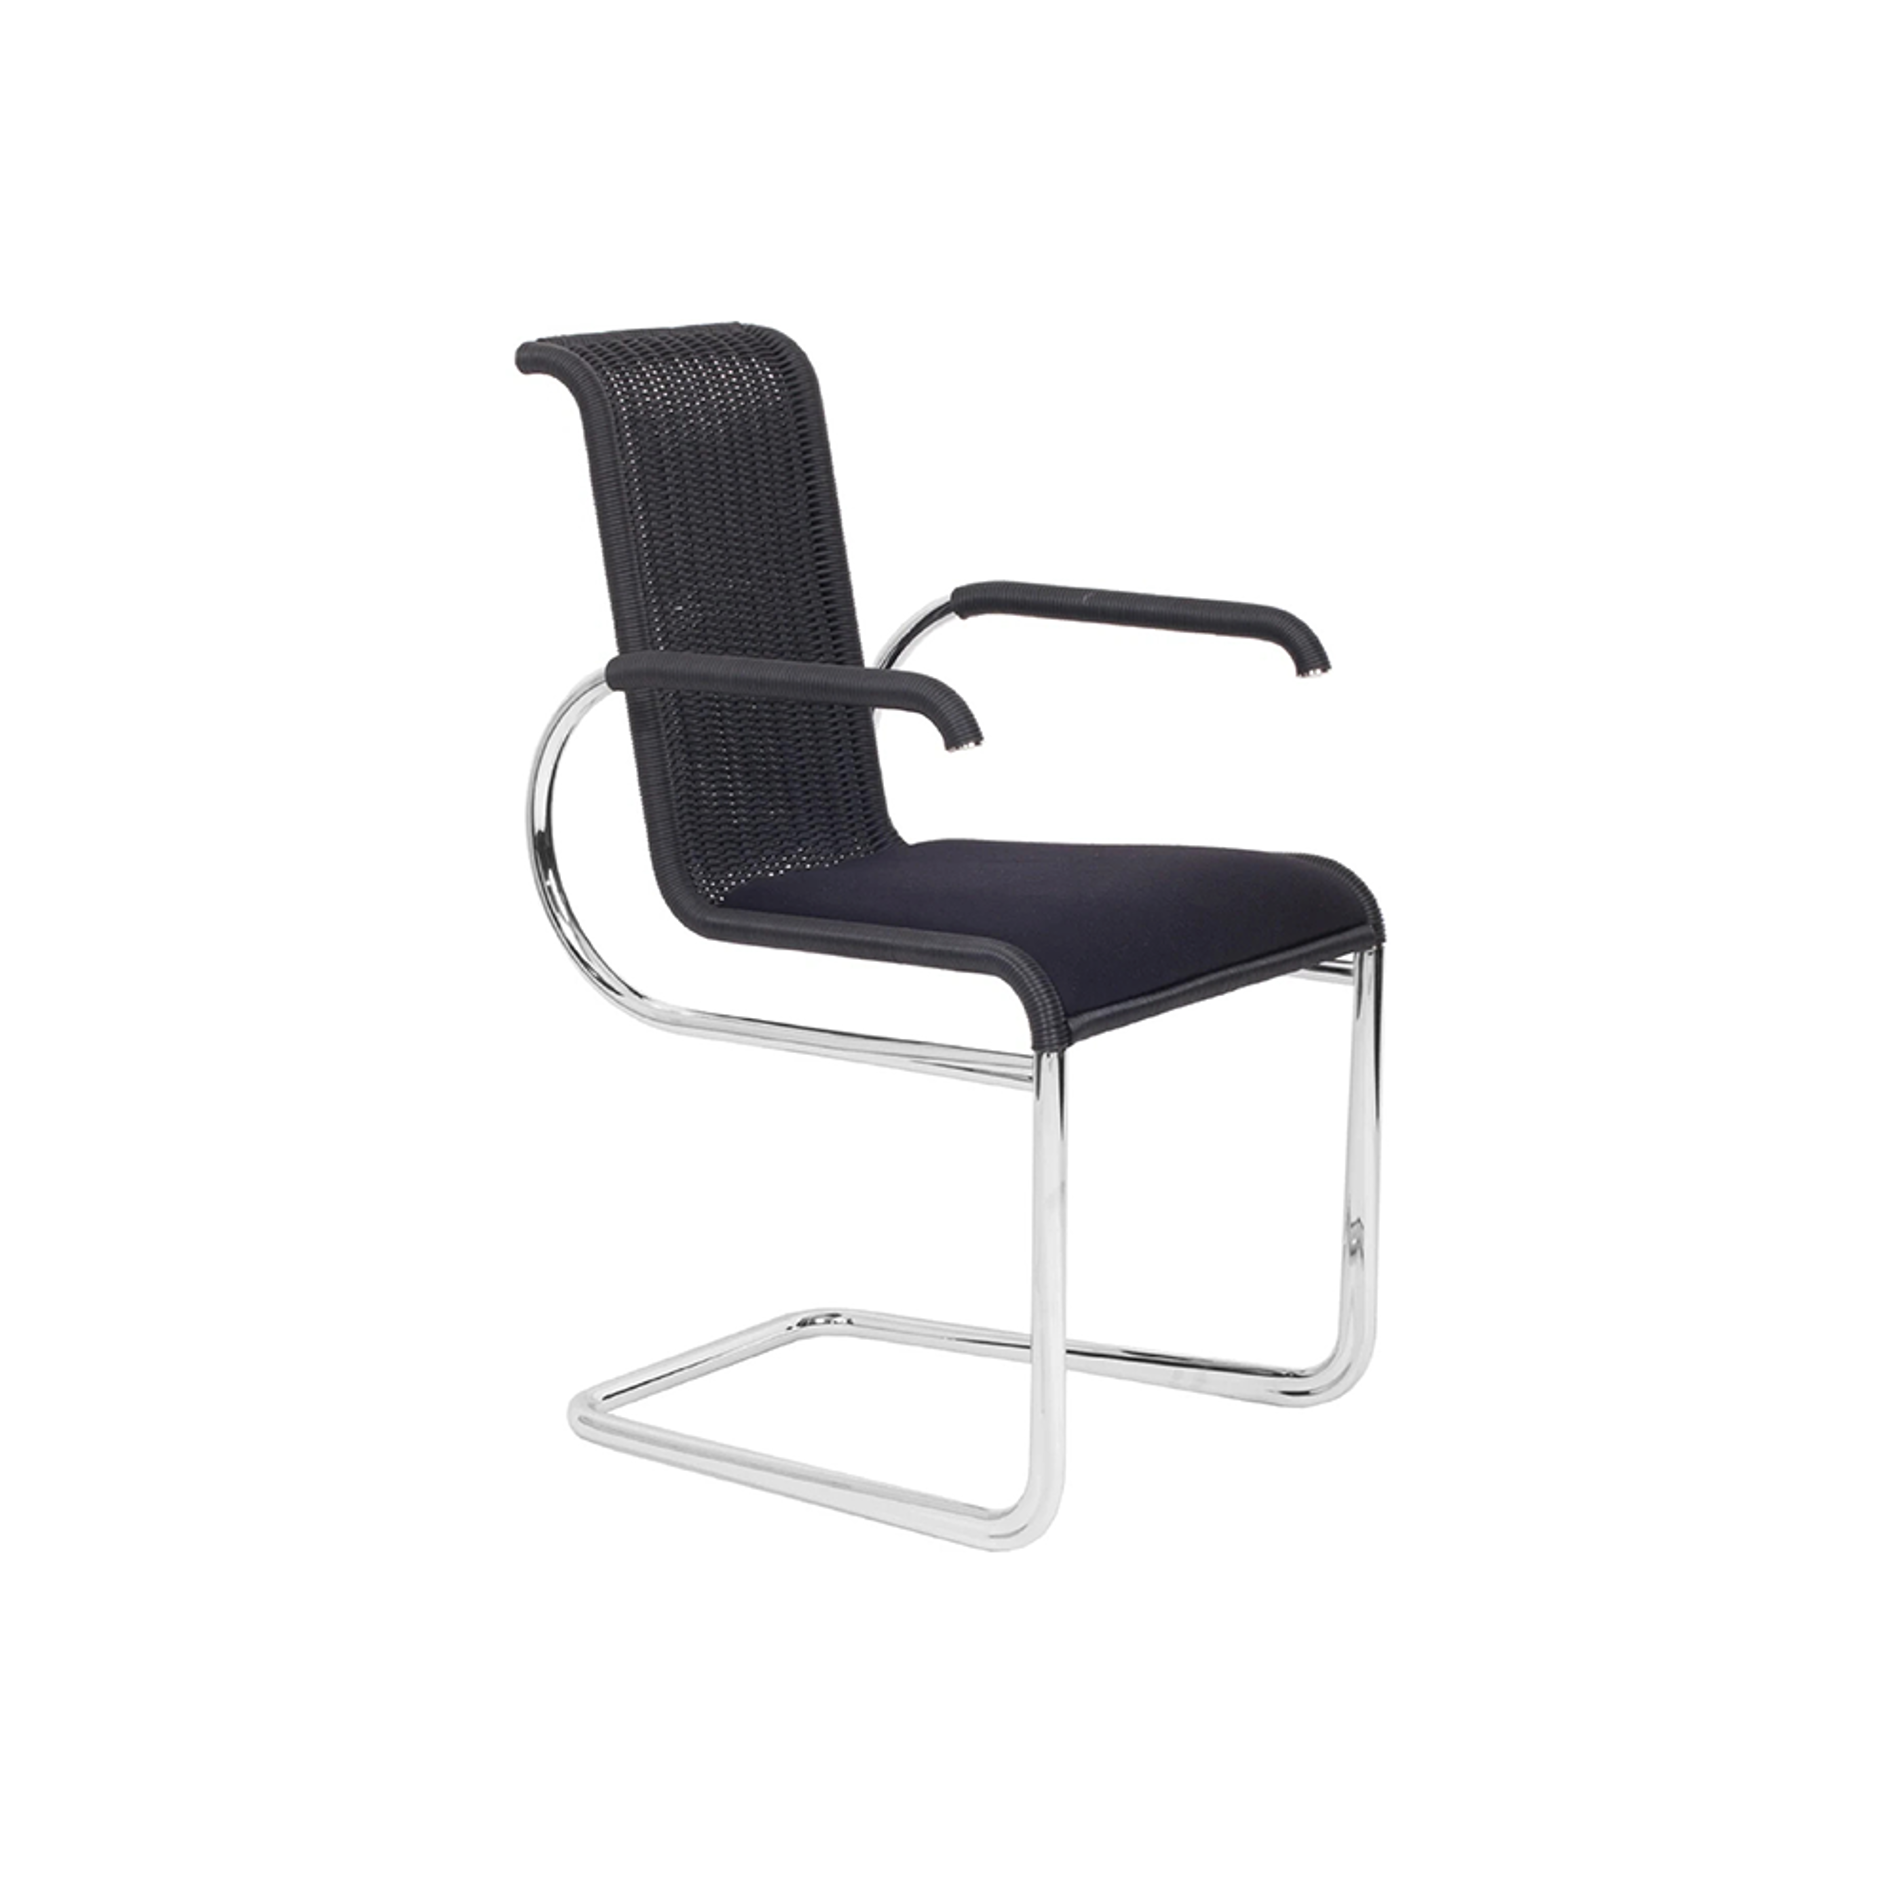 TECTA [Outlet|DP] D22I Cantilever Chair - Black